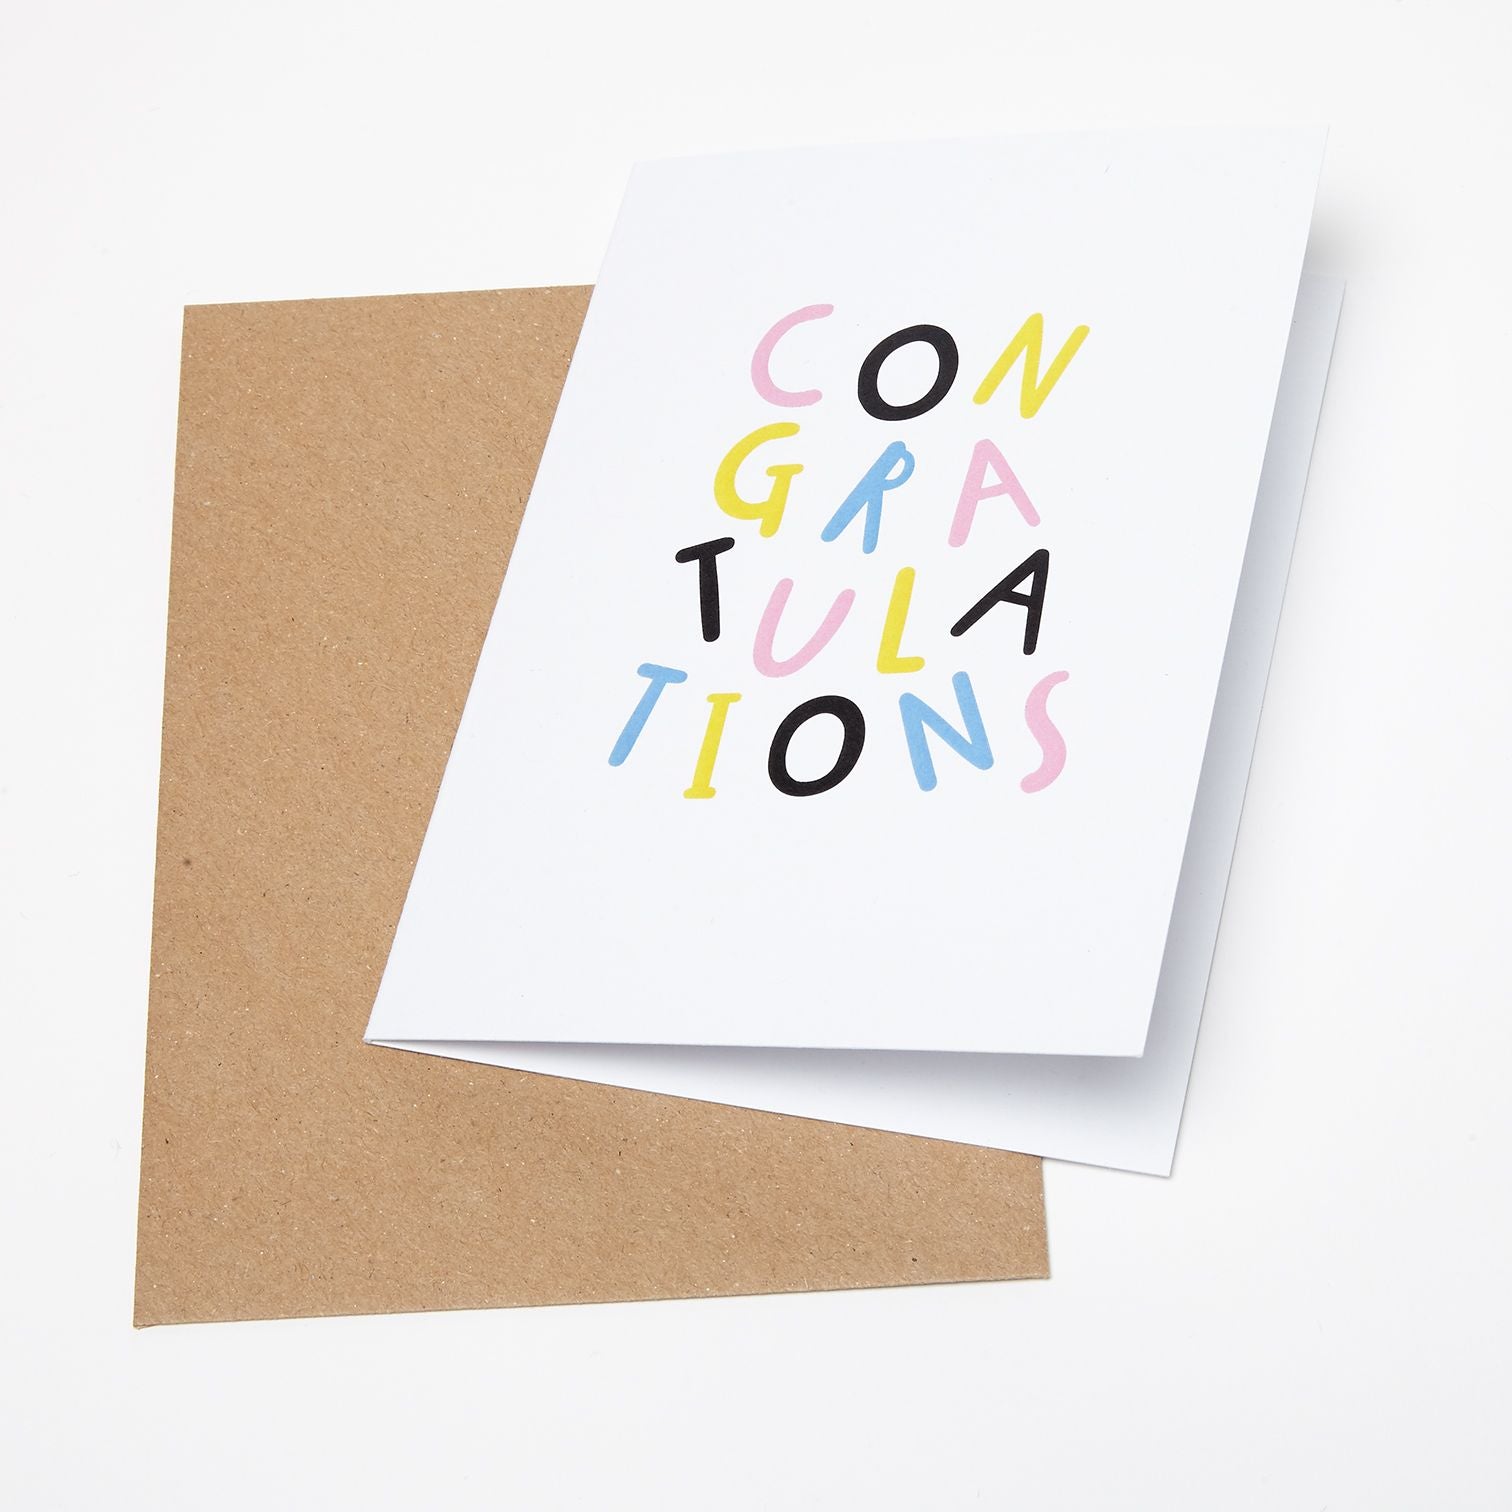 Congratulations - A6 Greetings card with envelope - Planet-friendly materials